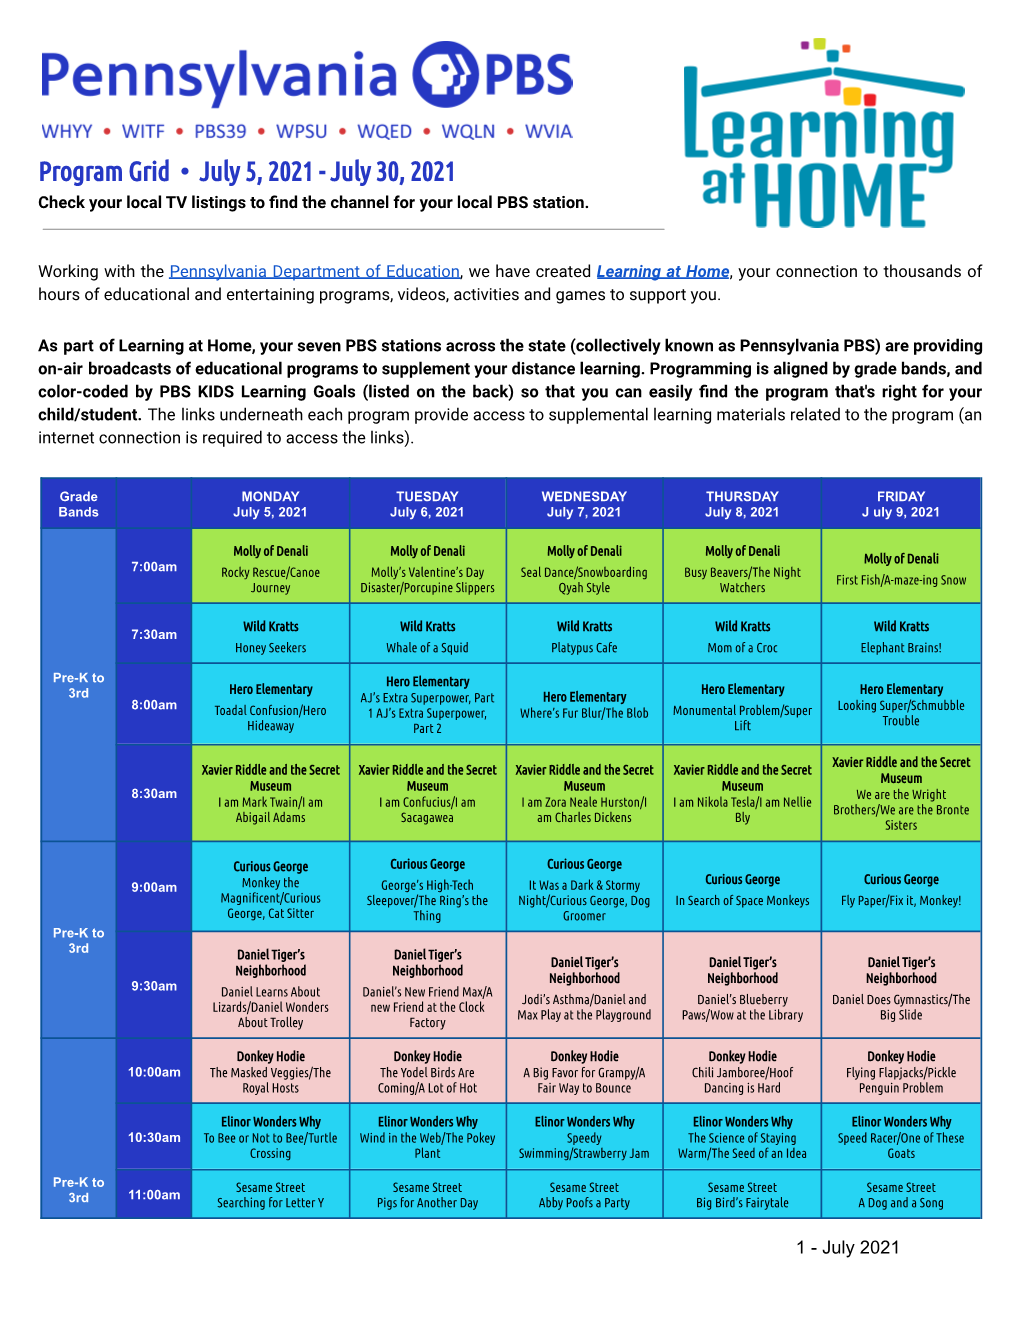 Download the Learning at Home Schedule [PDF]